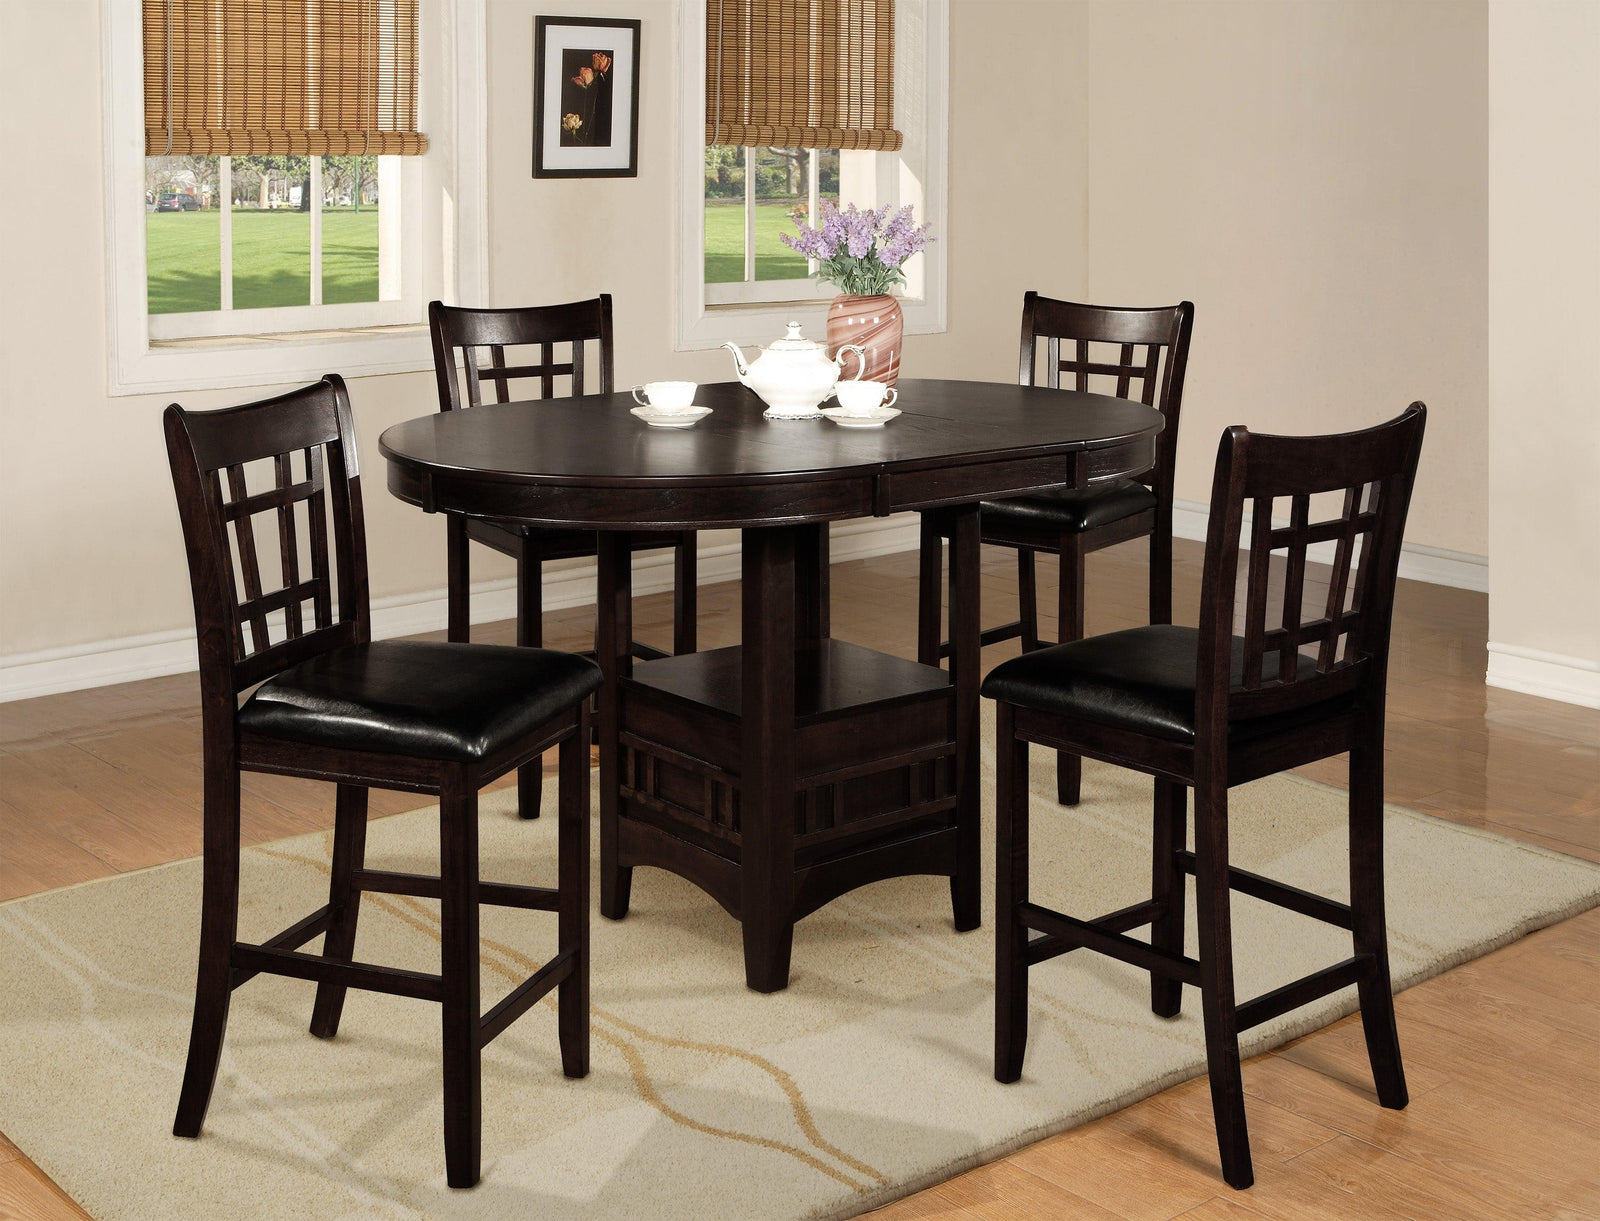 Hartwell Espresso Modern Wood Oval Extendable Counter Height Dining Room Set - Ella Furniture